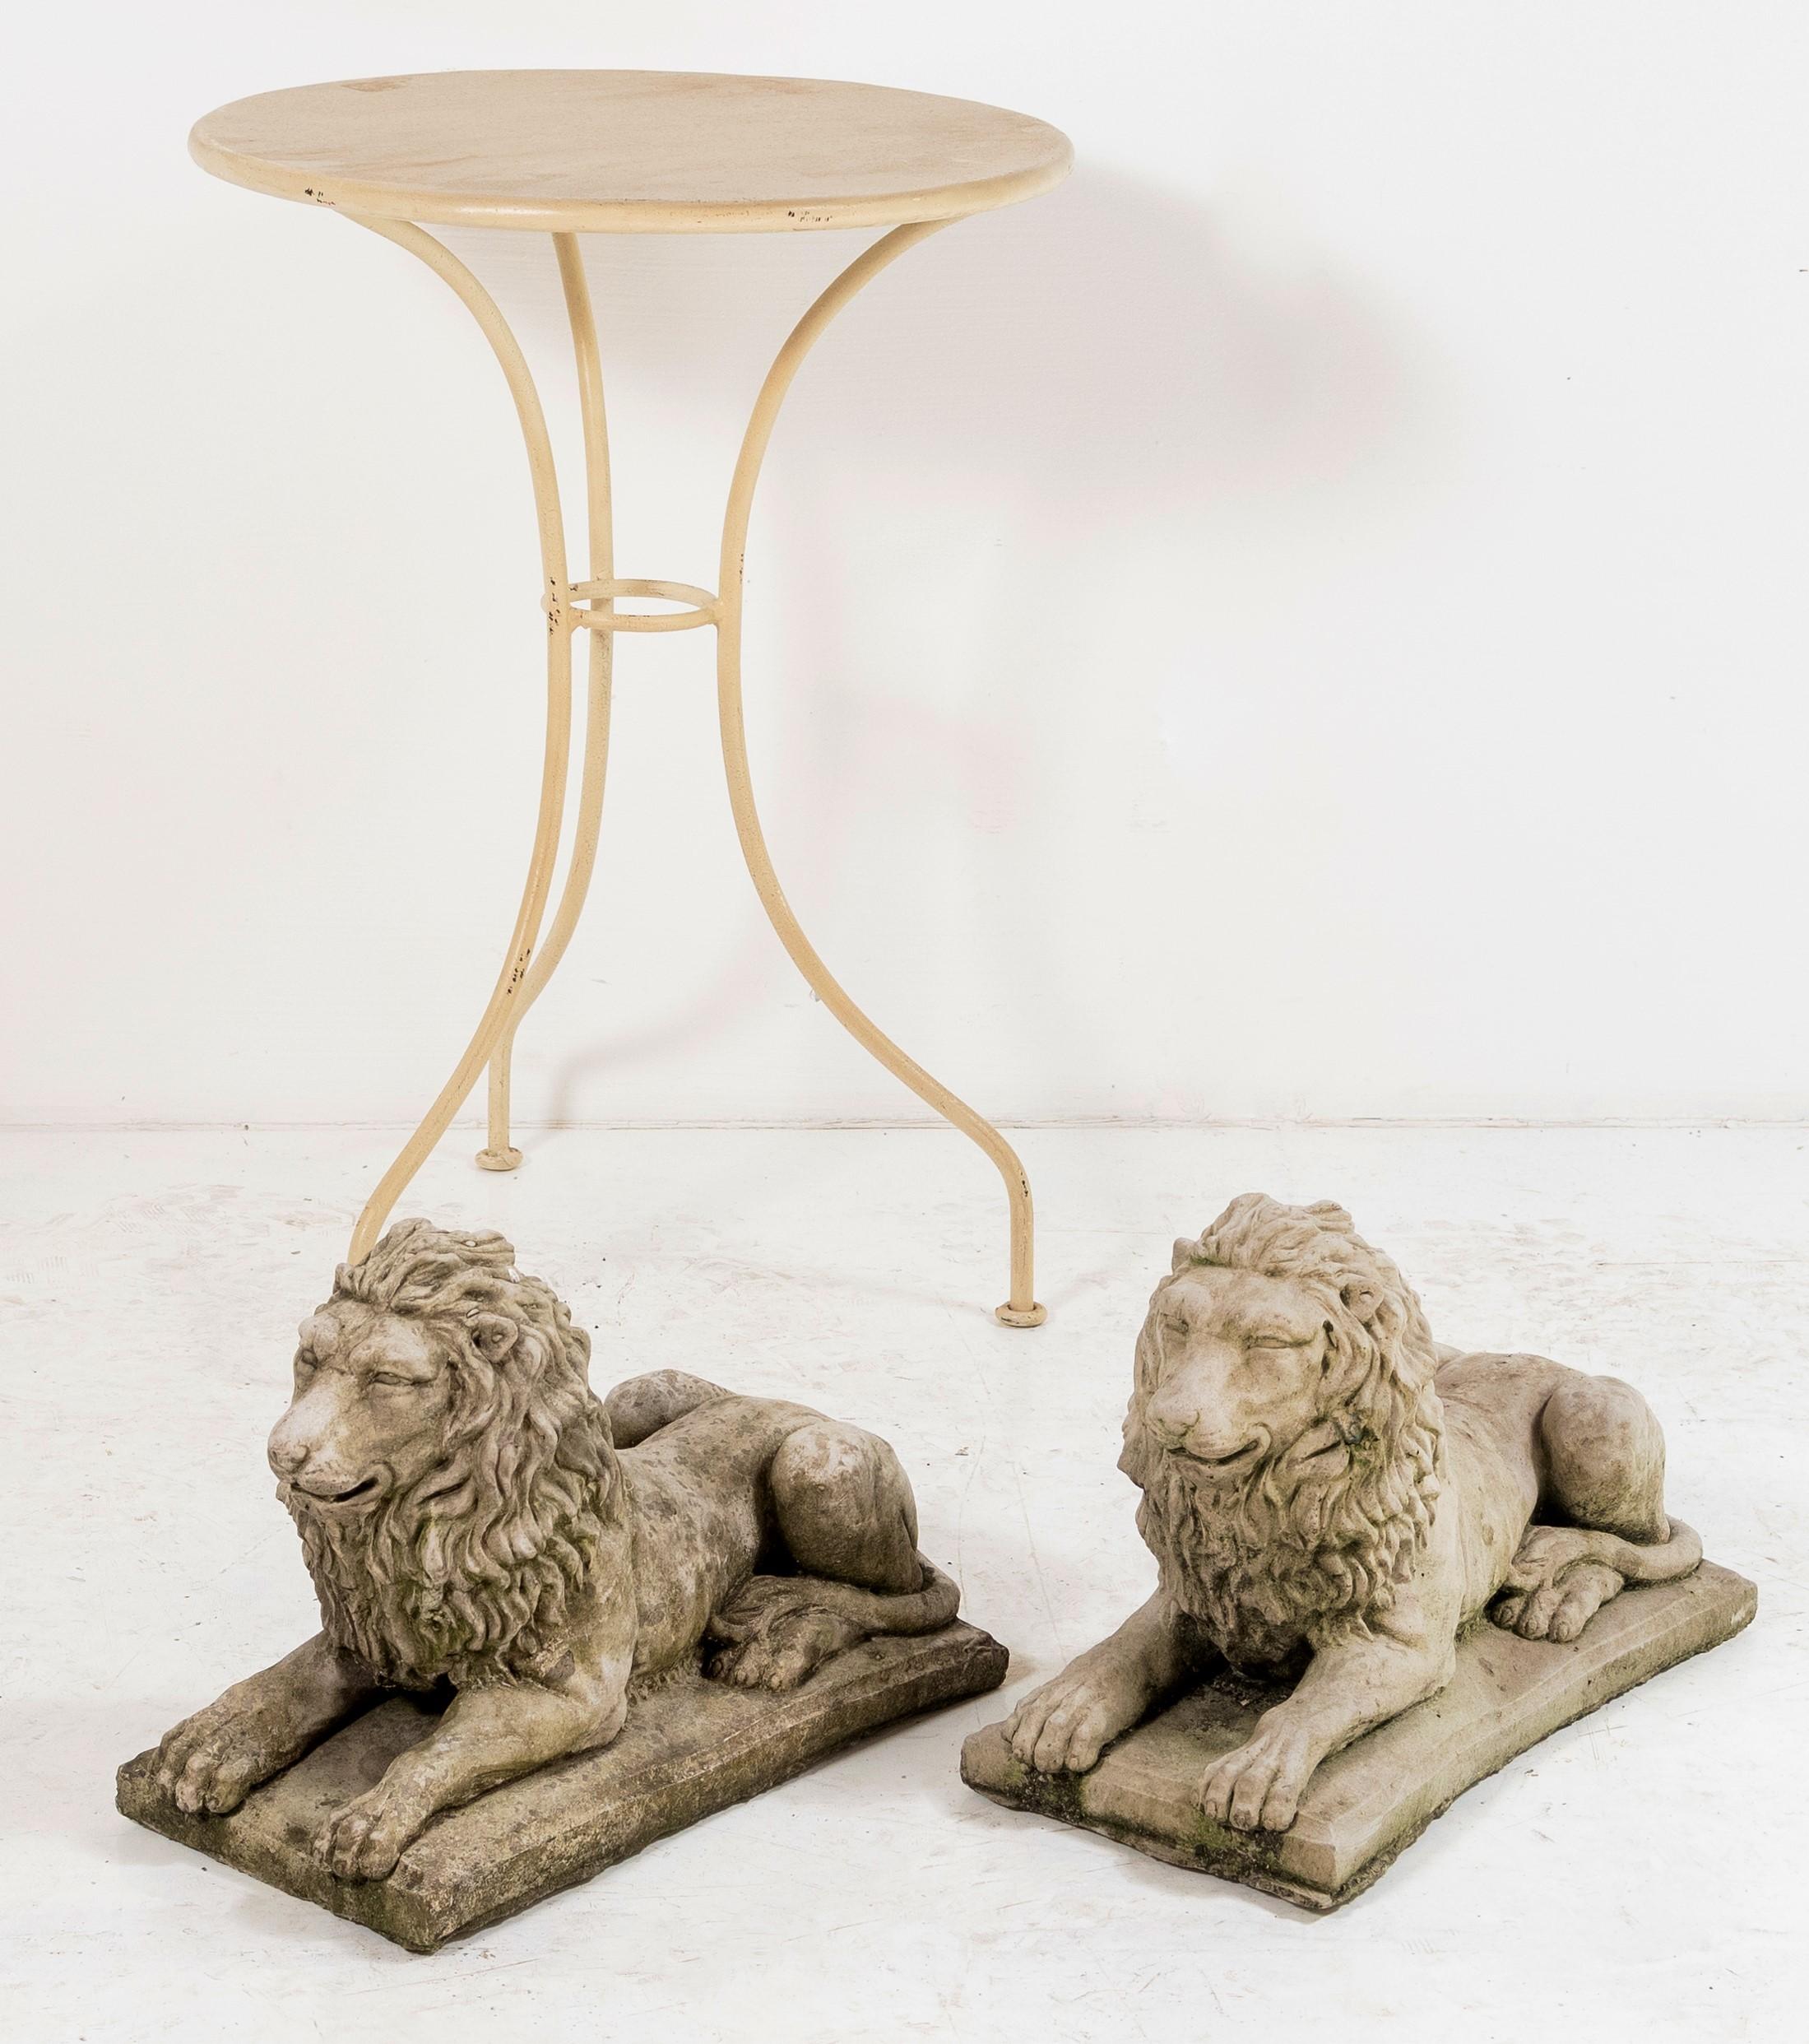 A pair of small composition stone recumbent lions, both front facing, very good detail and form, one slightly more weathered than the other but both make a good impression.
A good decorative addition to any garden, entrance or loggia, would also